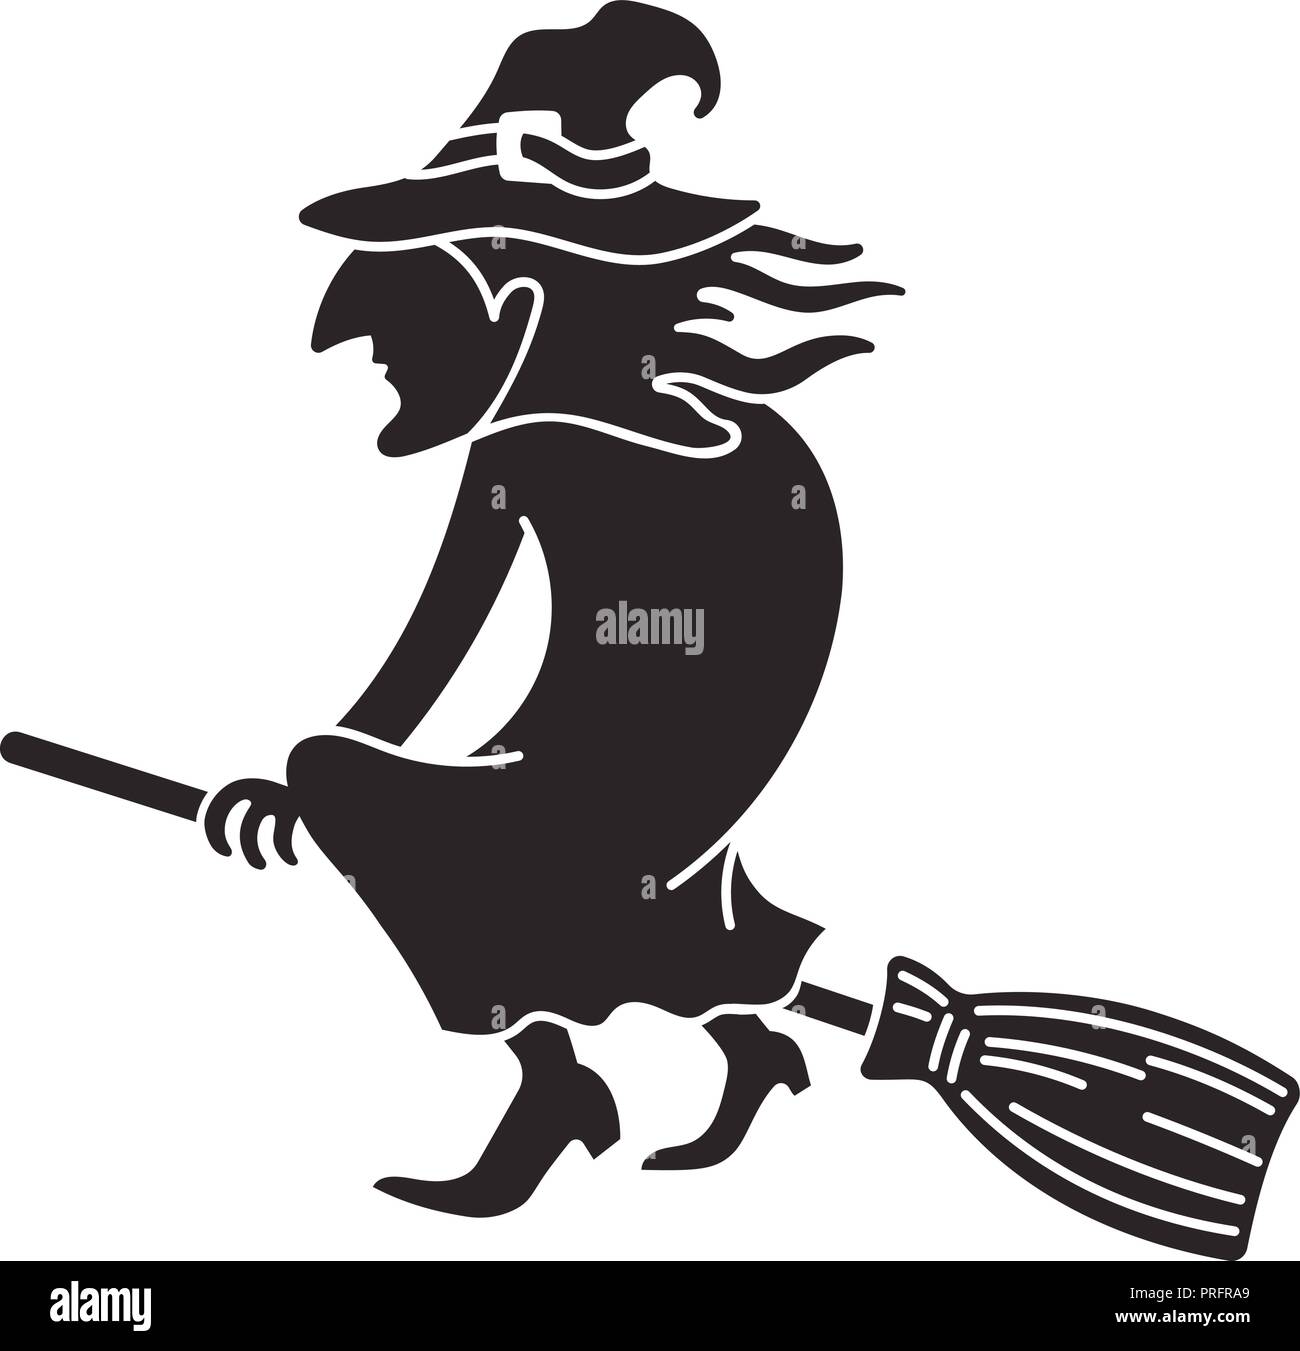 Witch Silhouette Stock Photos & Witch Silhouette Stock Images - Alamy